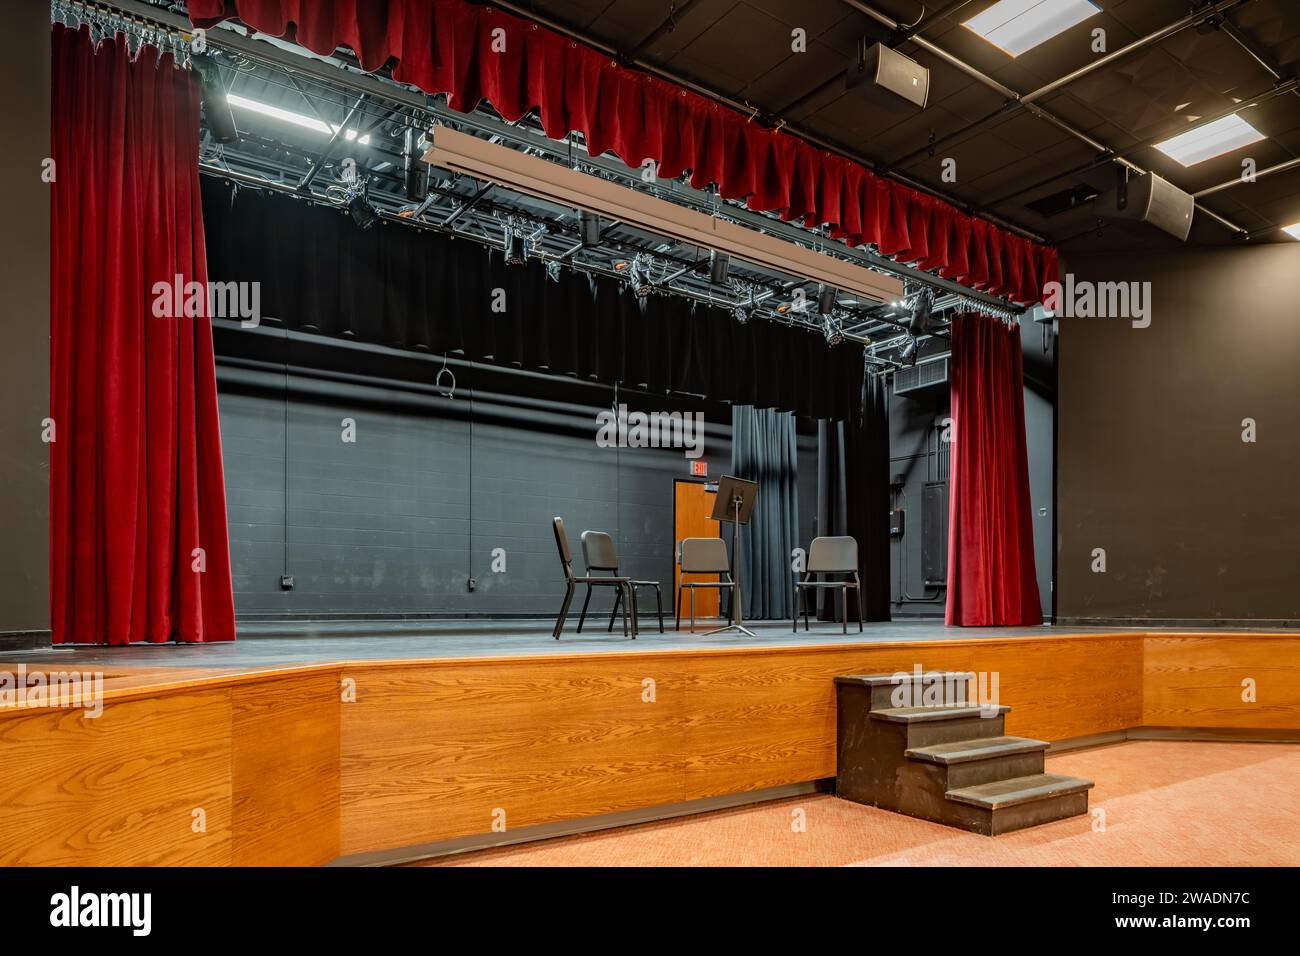 Photo of a new school stage, theater, auditorium, with gray seats, chairs. Stock Photo